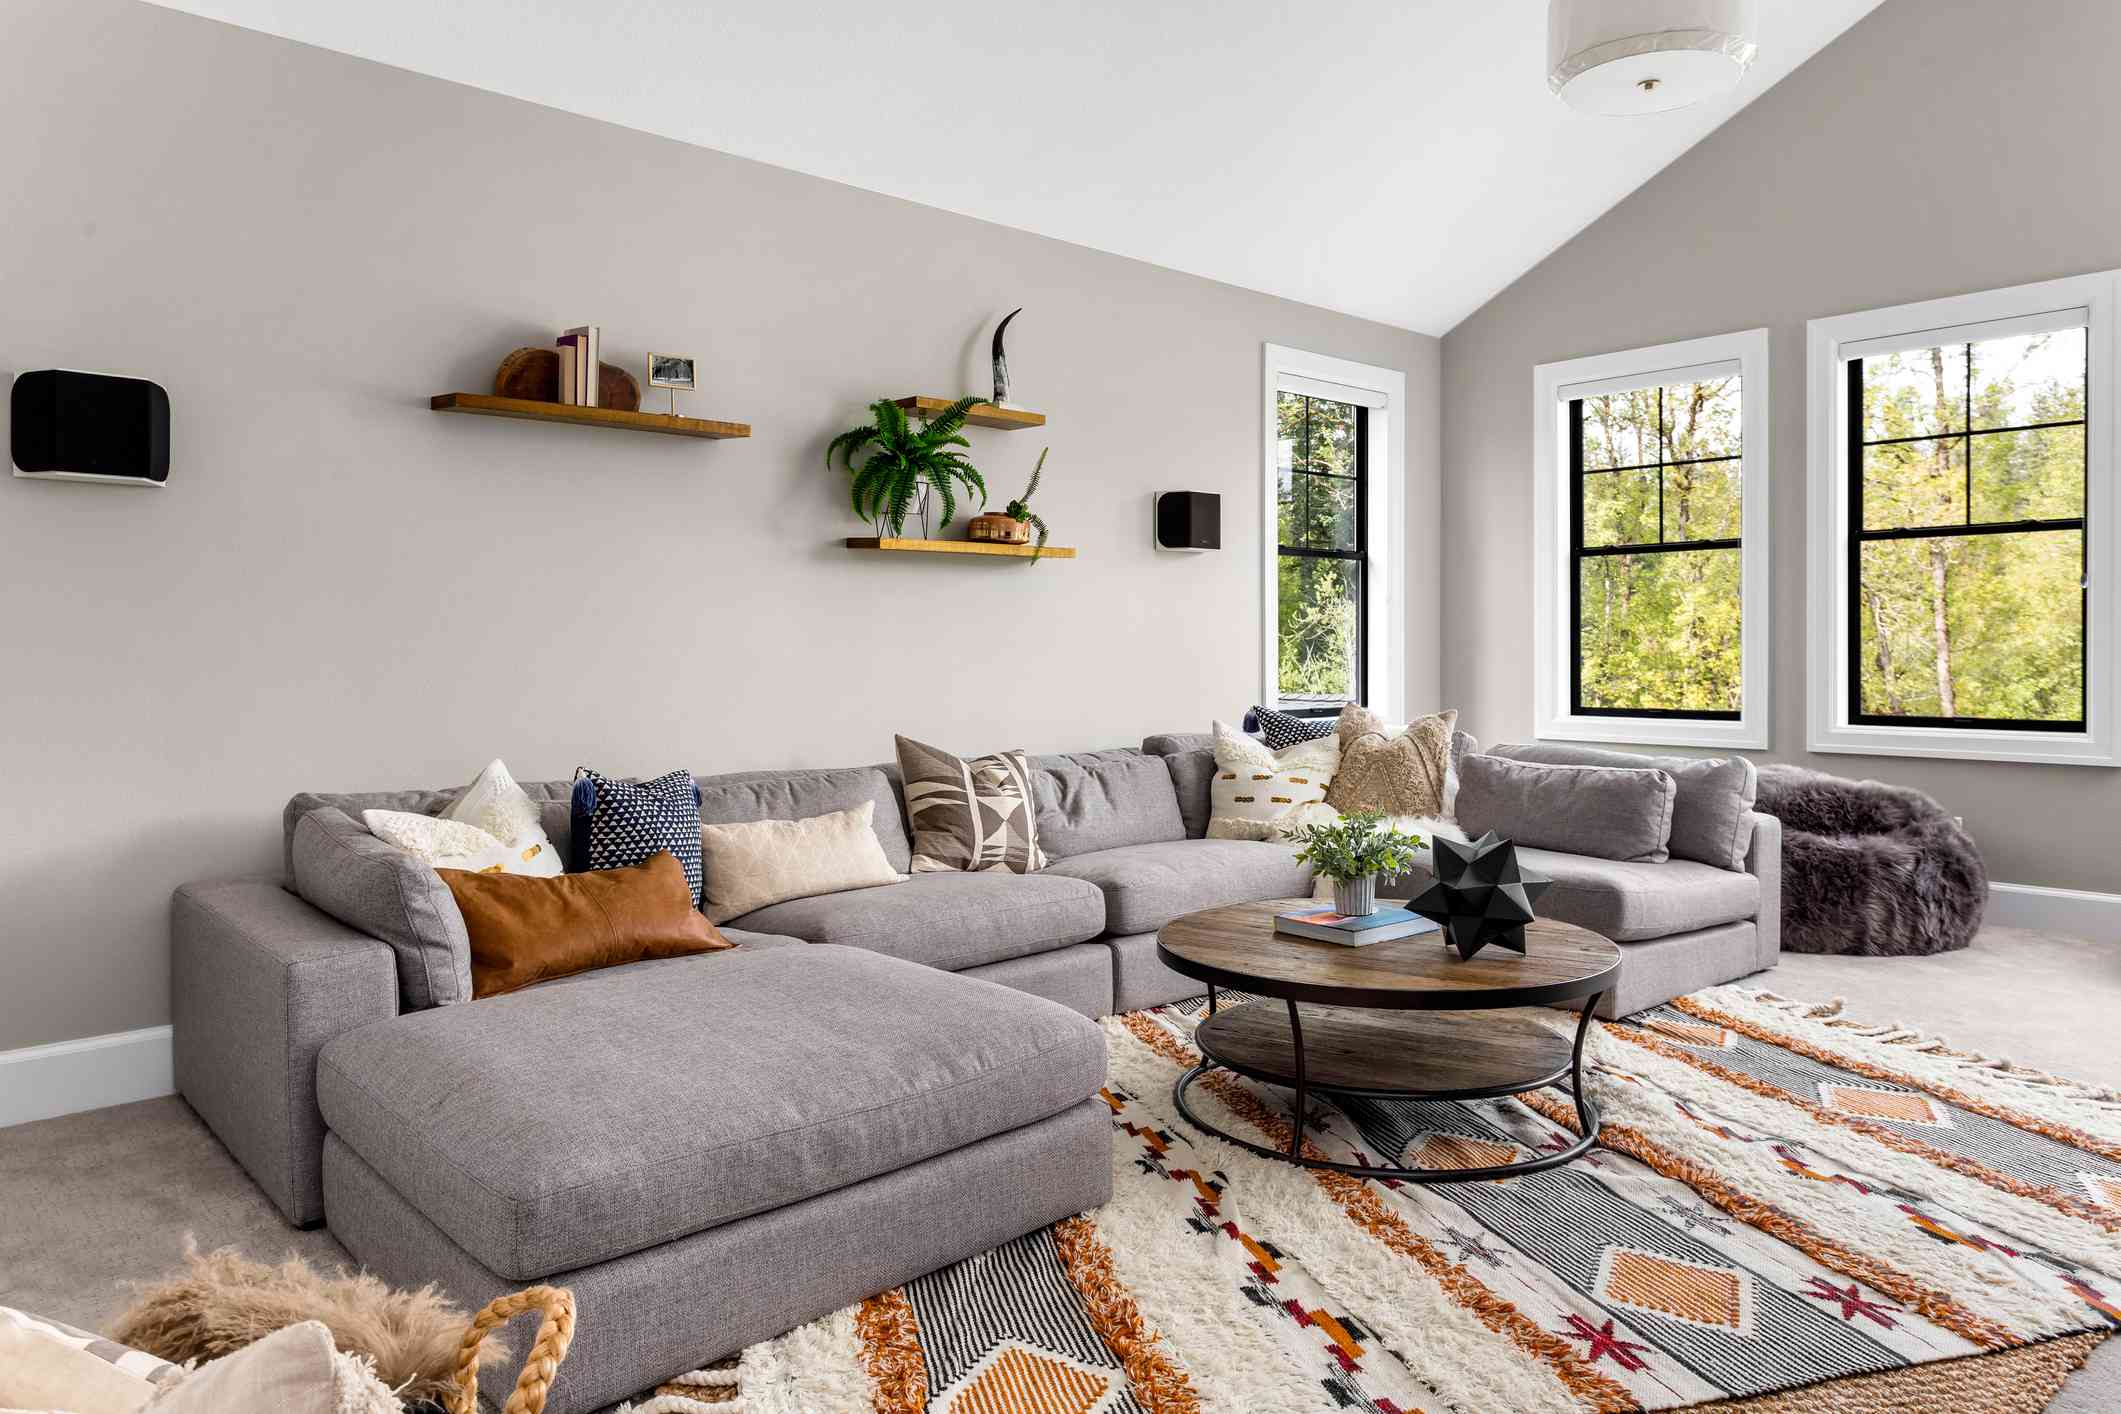 How To Place An Area Rug Under A Sectional Sofa